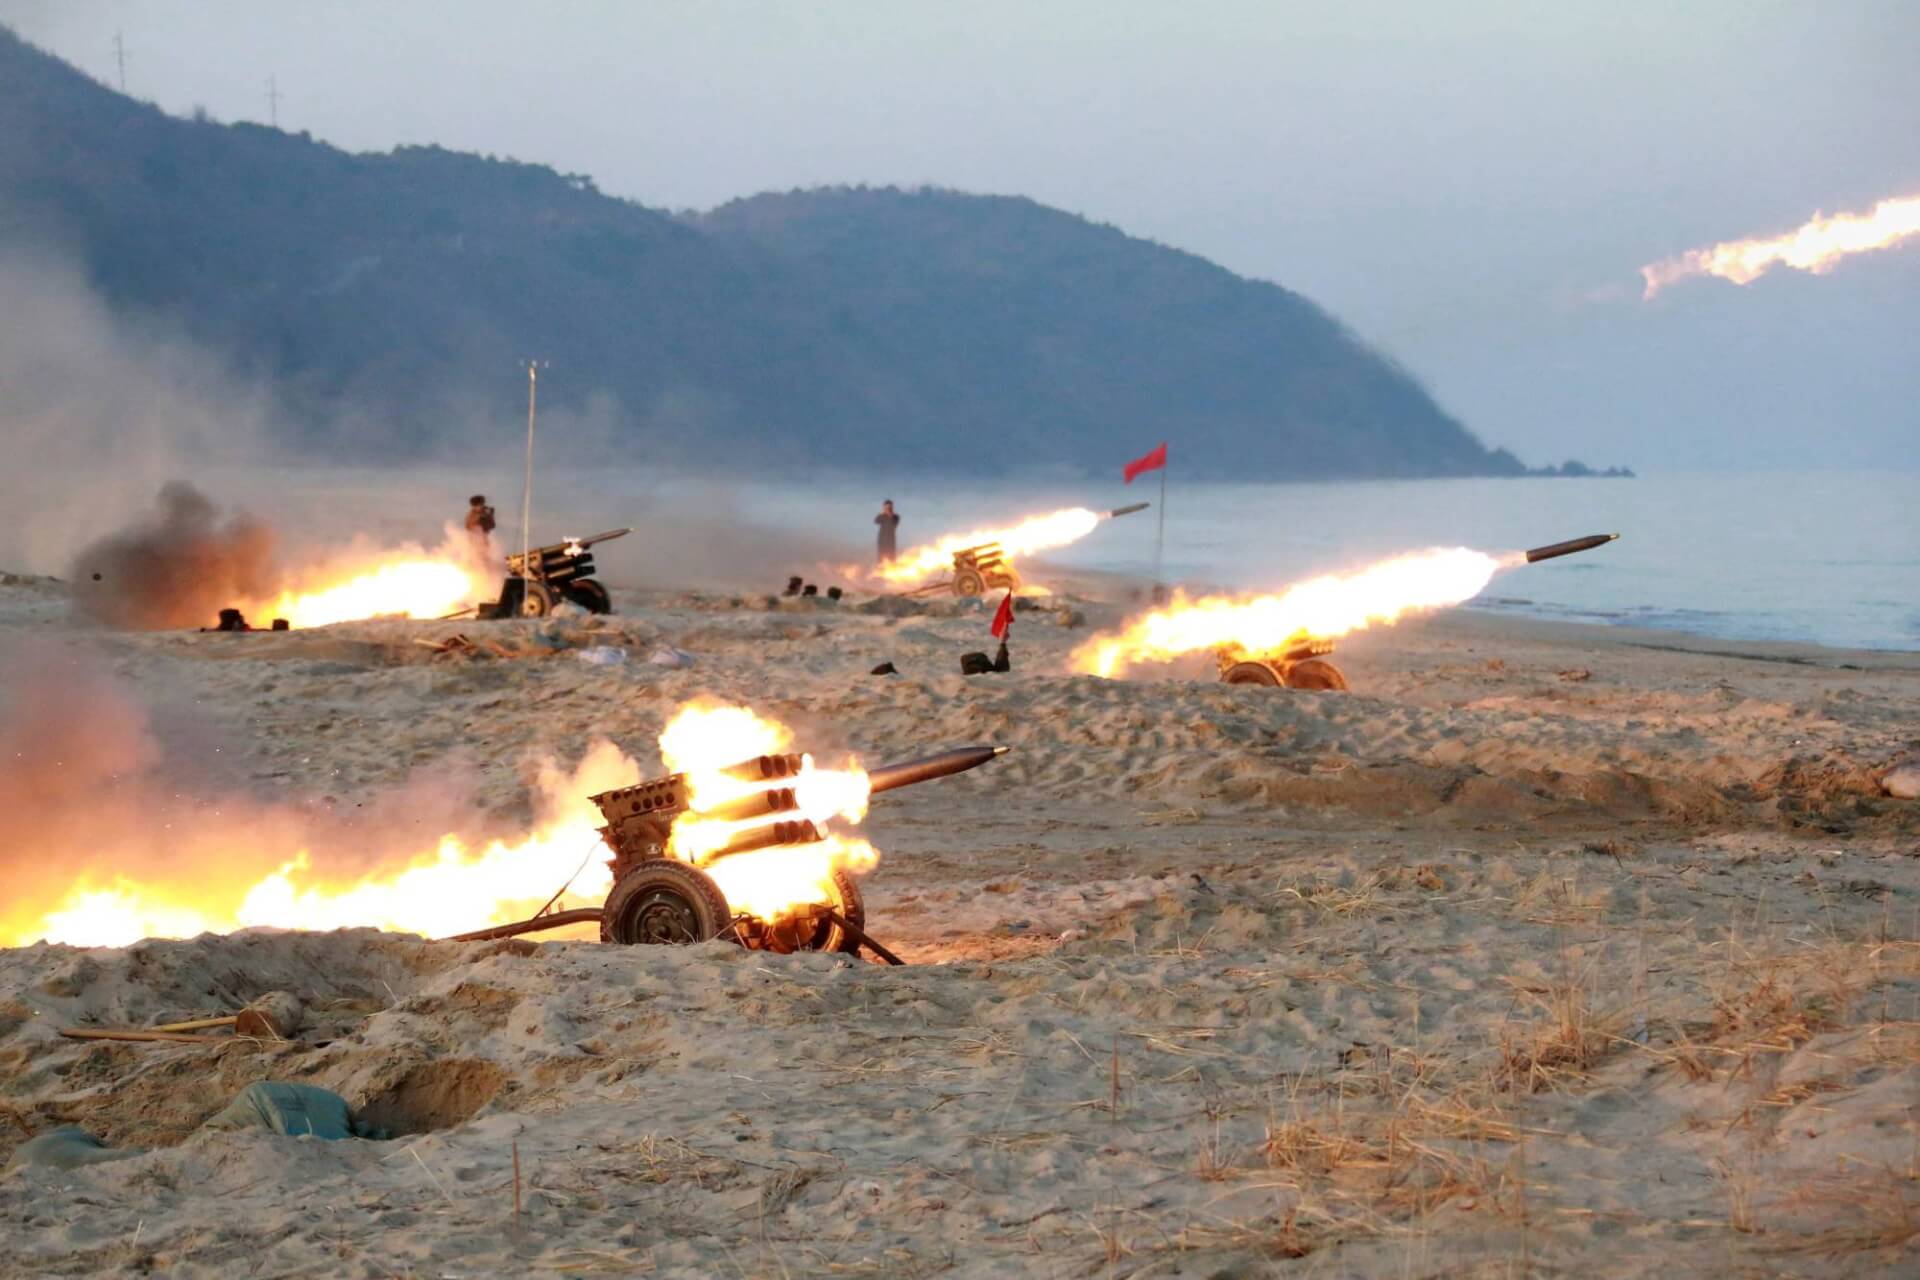 N. Korea Fires Into Buffer Zone With S. Korea in “Grave Warning”